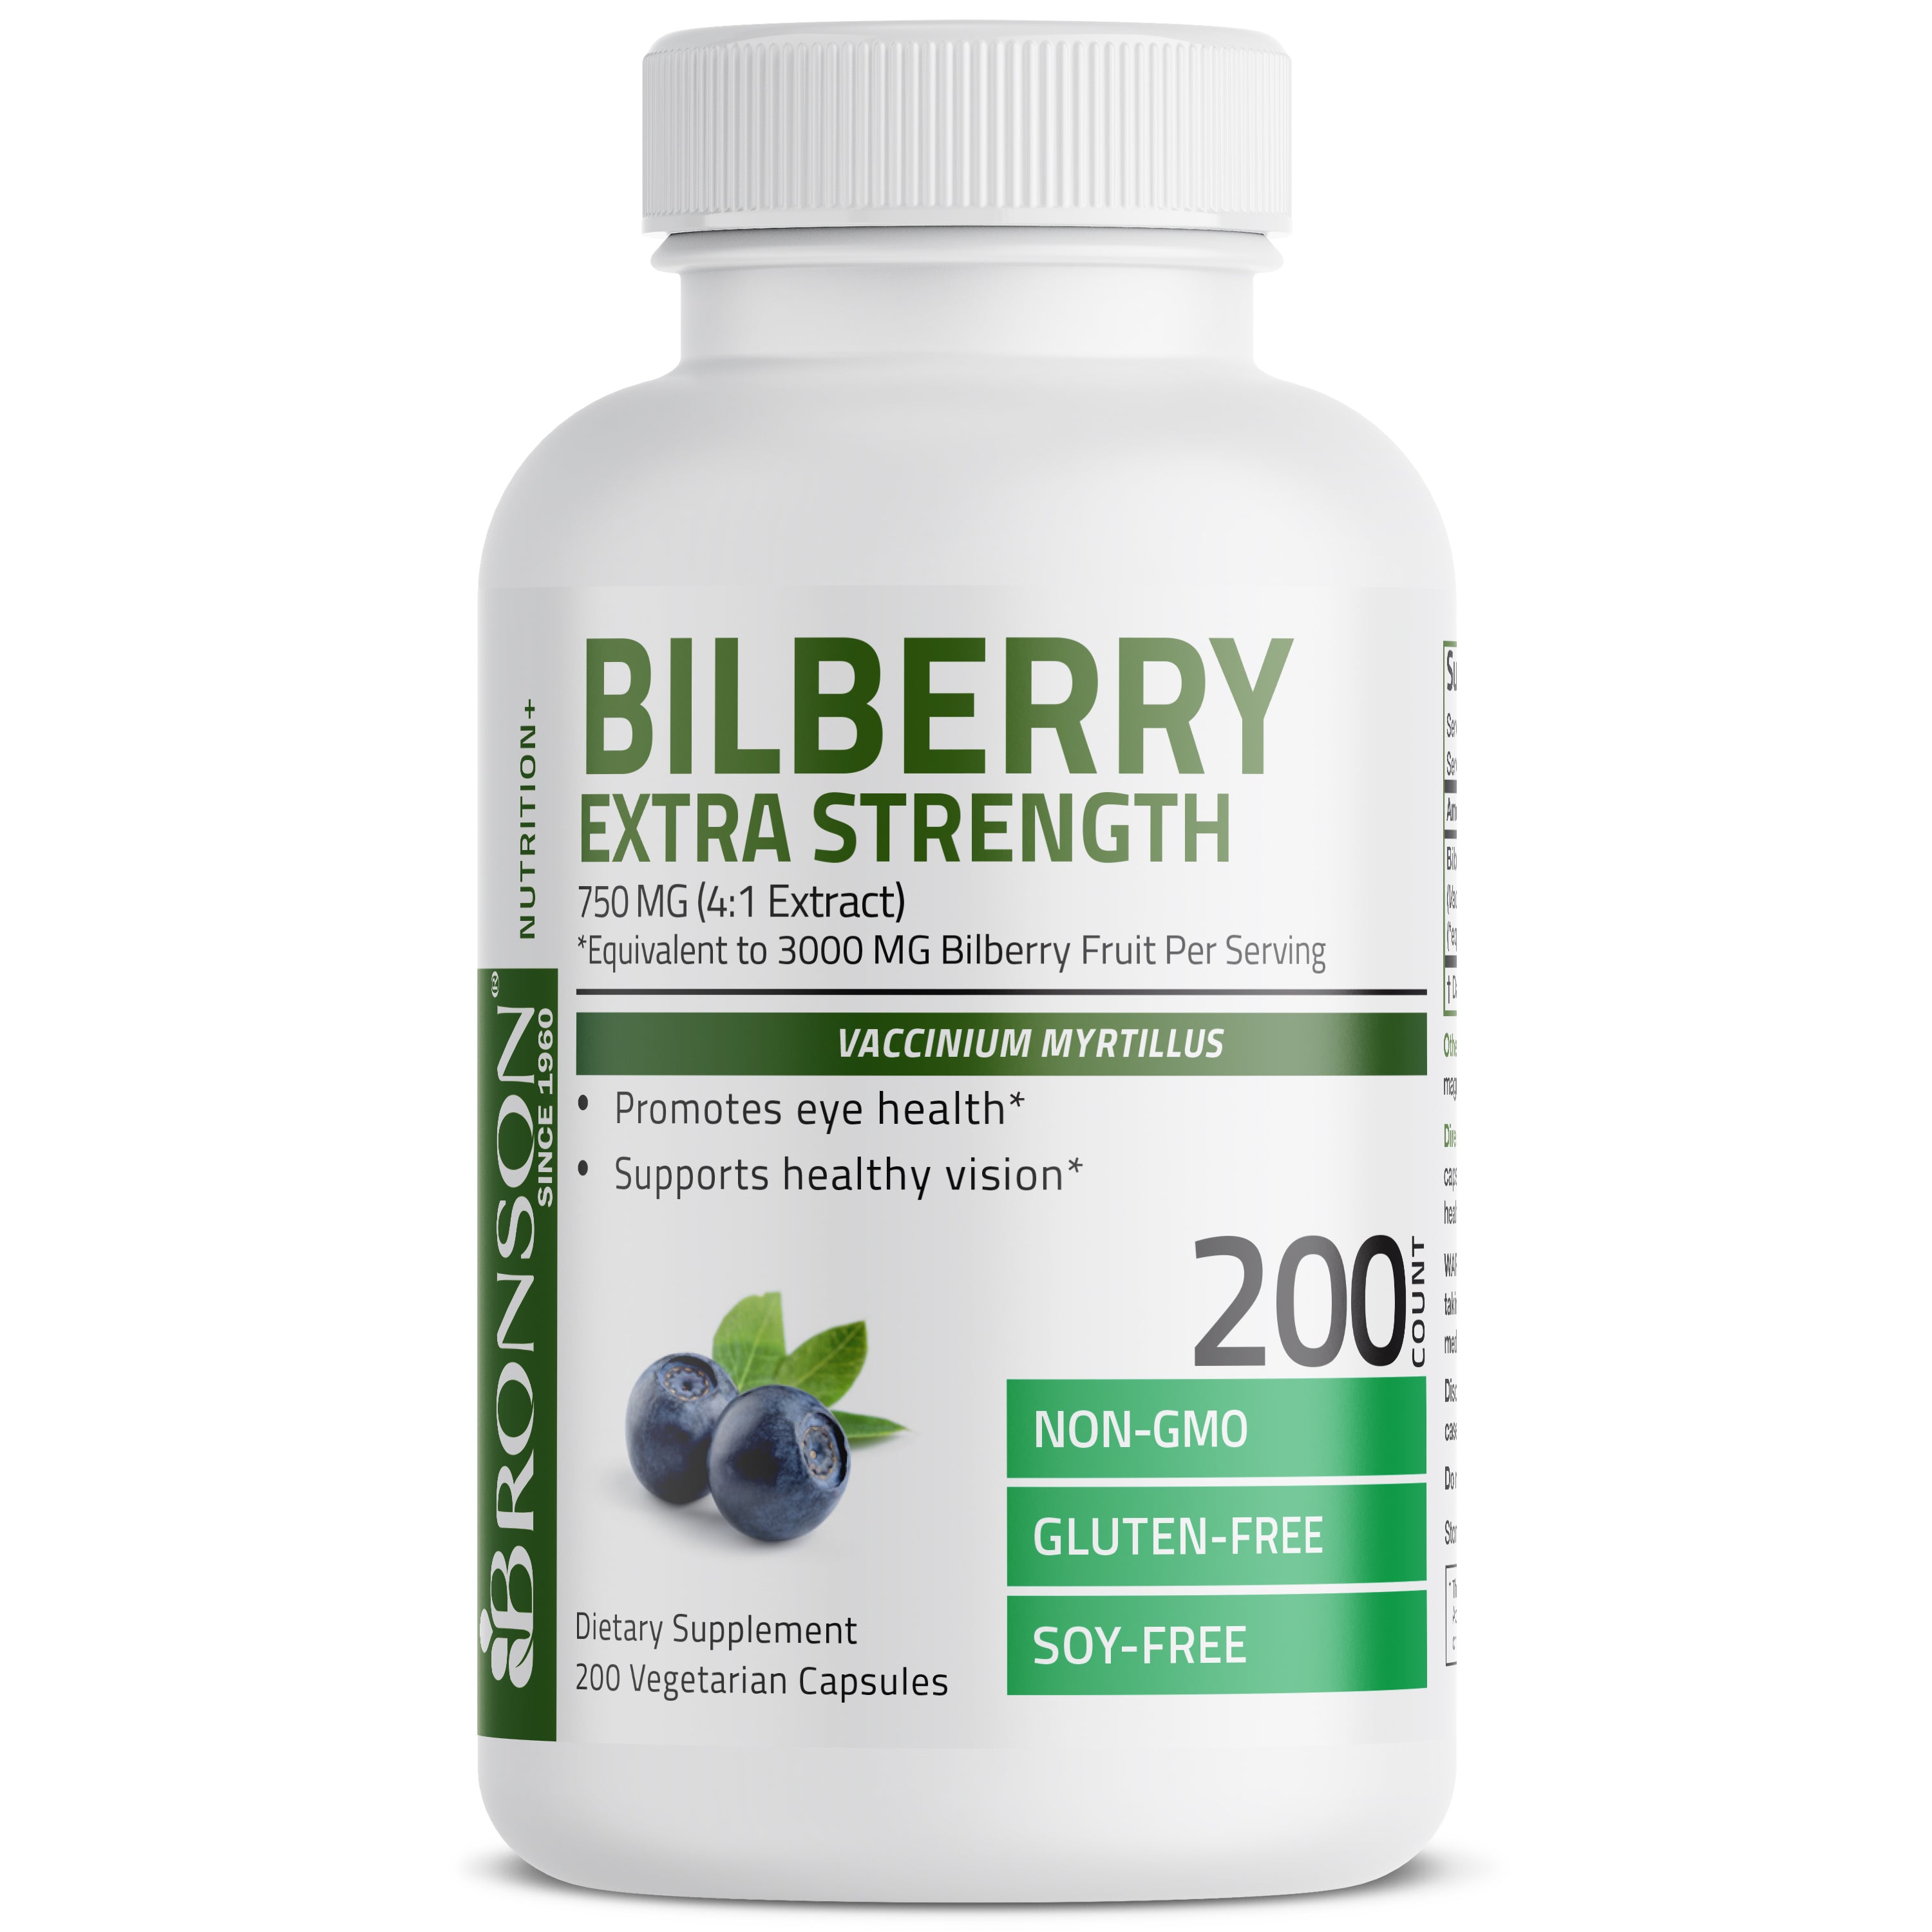 Bilberry Extra Strength 3000 mg, 200 Vegetarian Capsules view 4 of 7